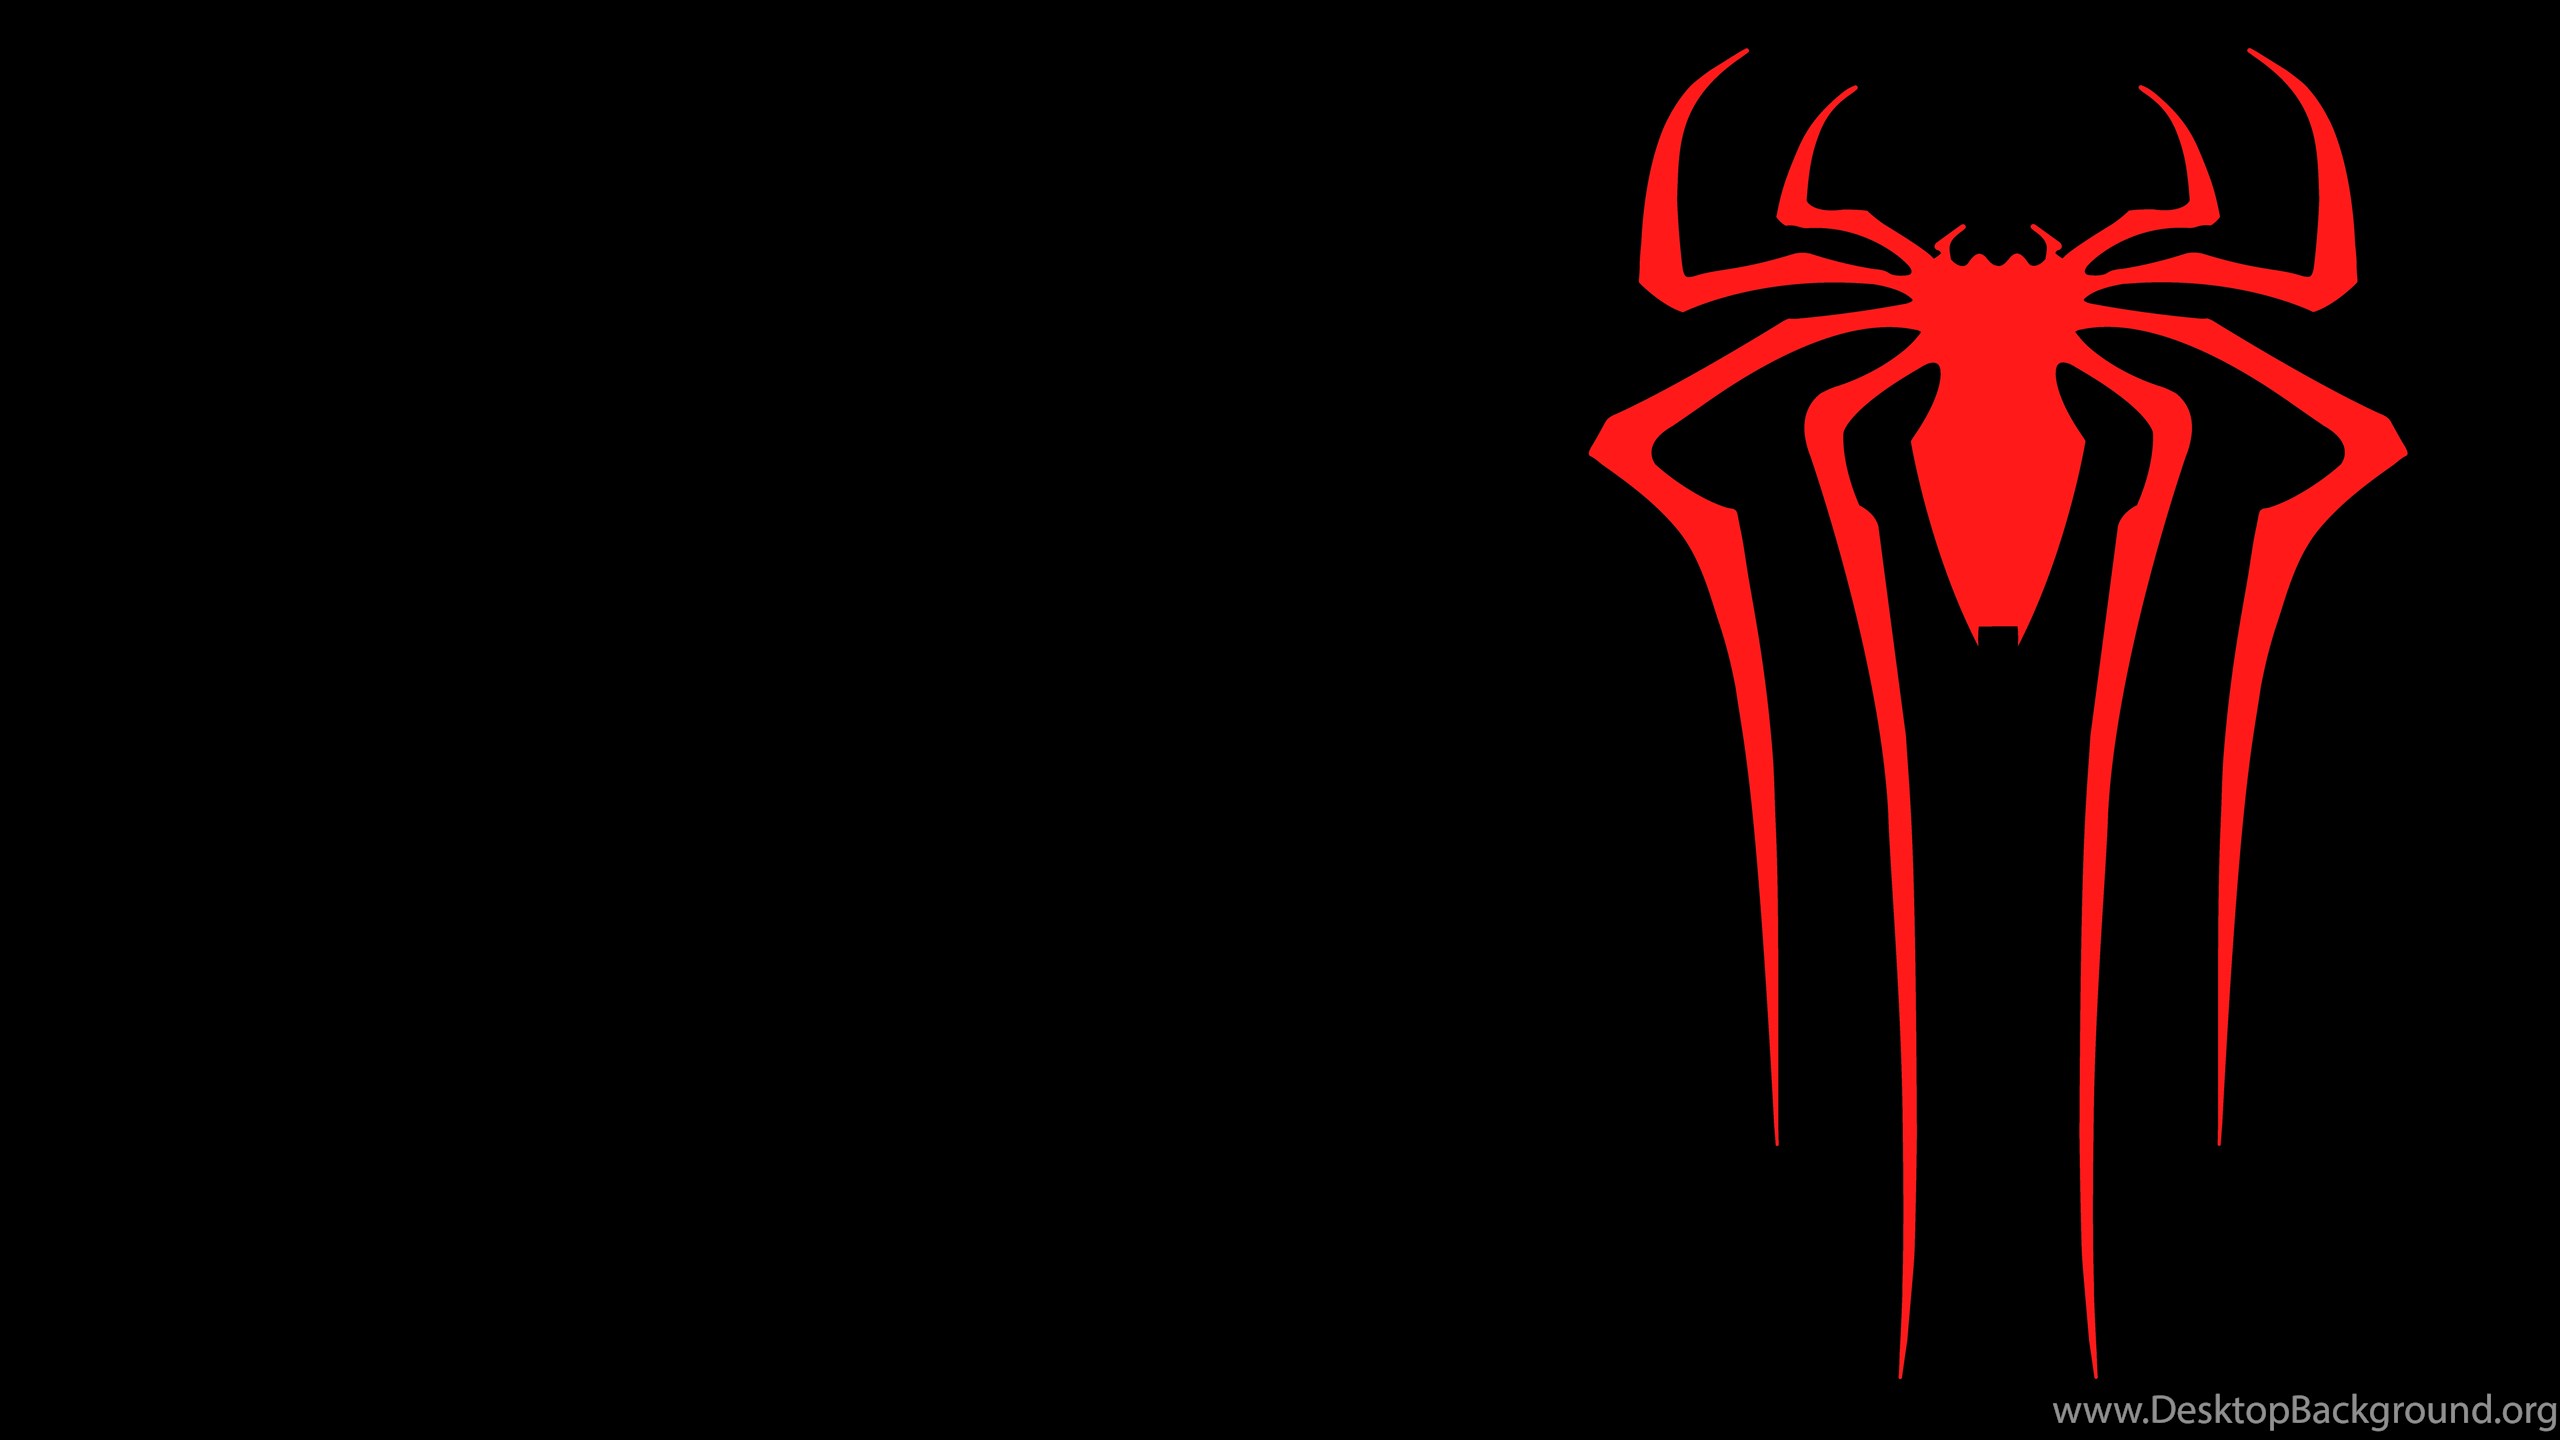 Other Wallpaper Spiderman Logo Wallpaper Backgrounds Hd Quality